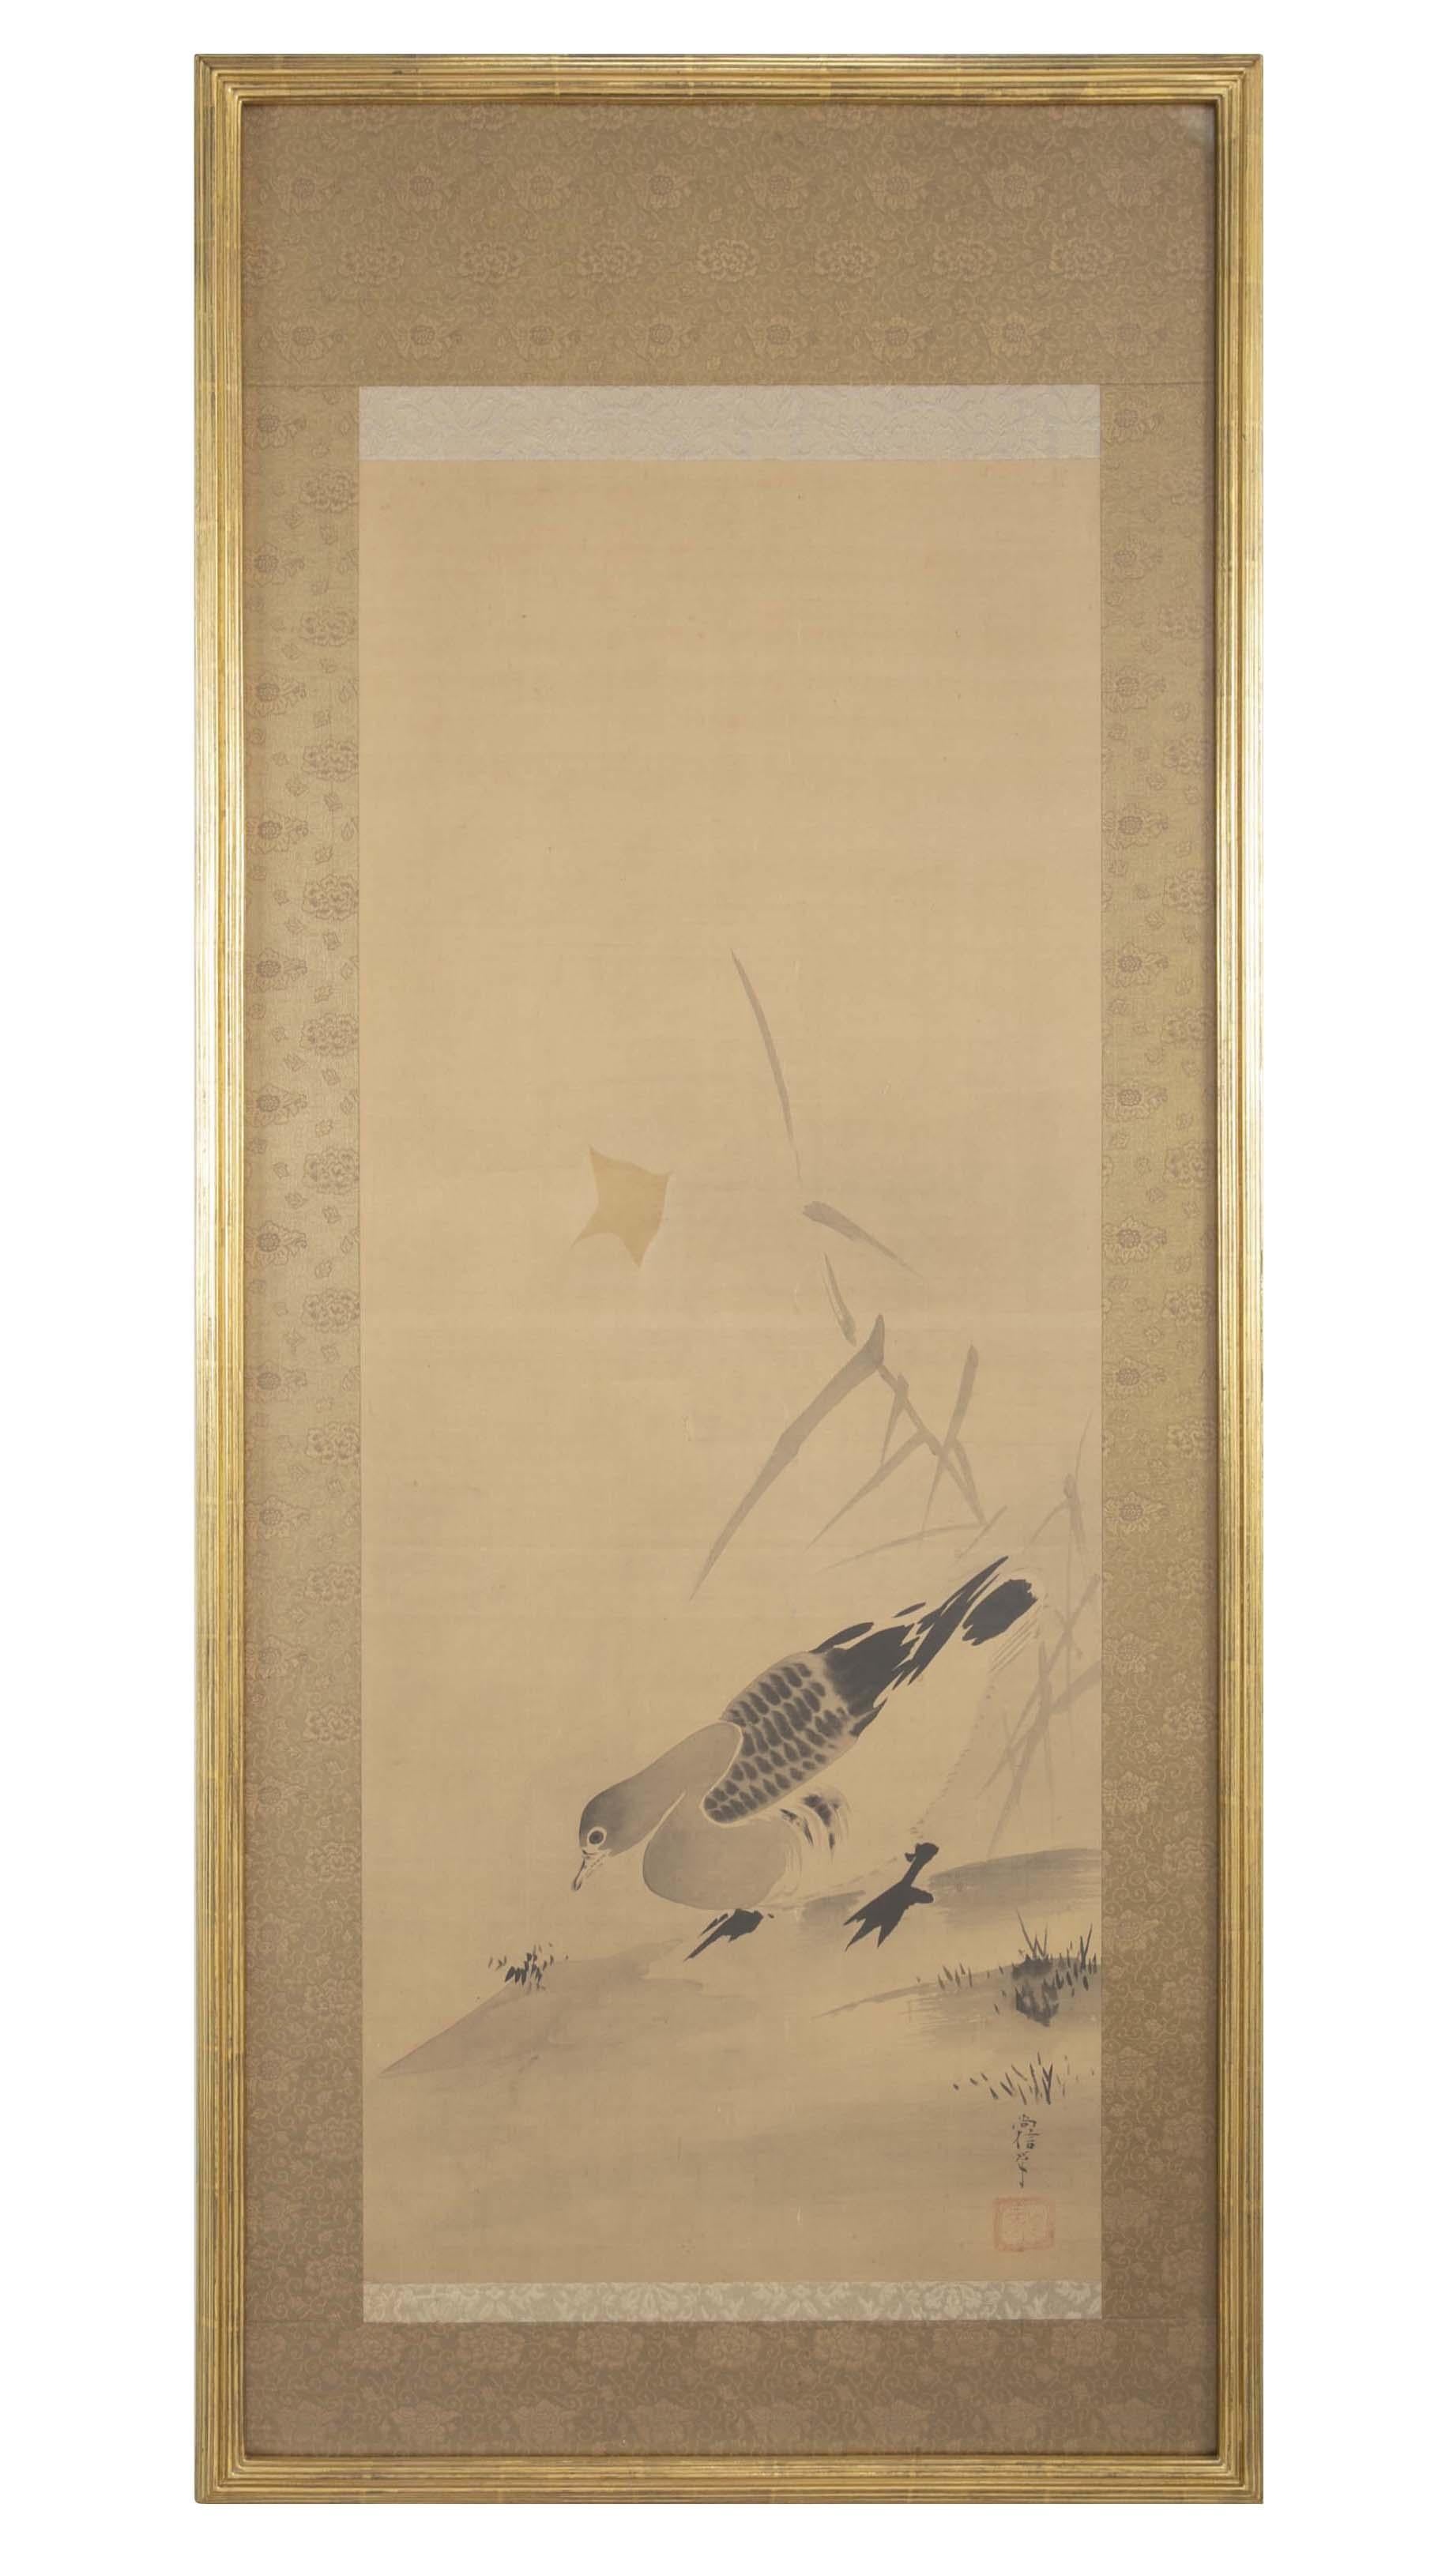 Pair of 19th century Japanese scrolls in frames with lotus, white heron circle of Kano Naonobu (Japan, 1607-1660) and duck beside a pond.